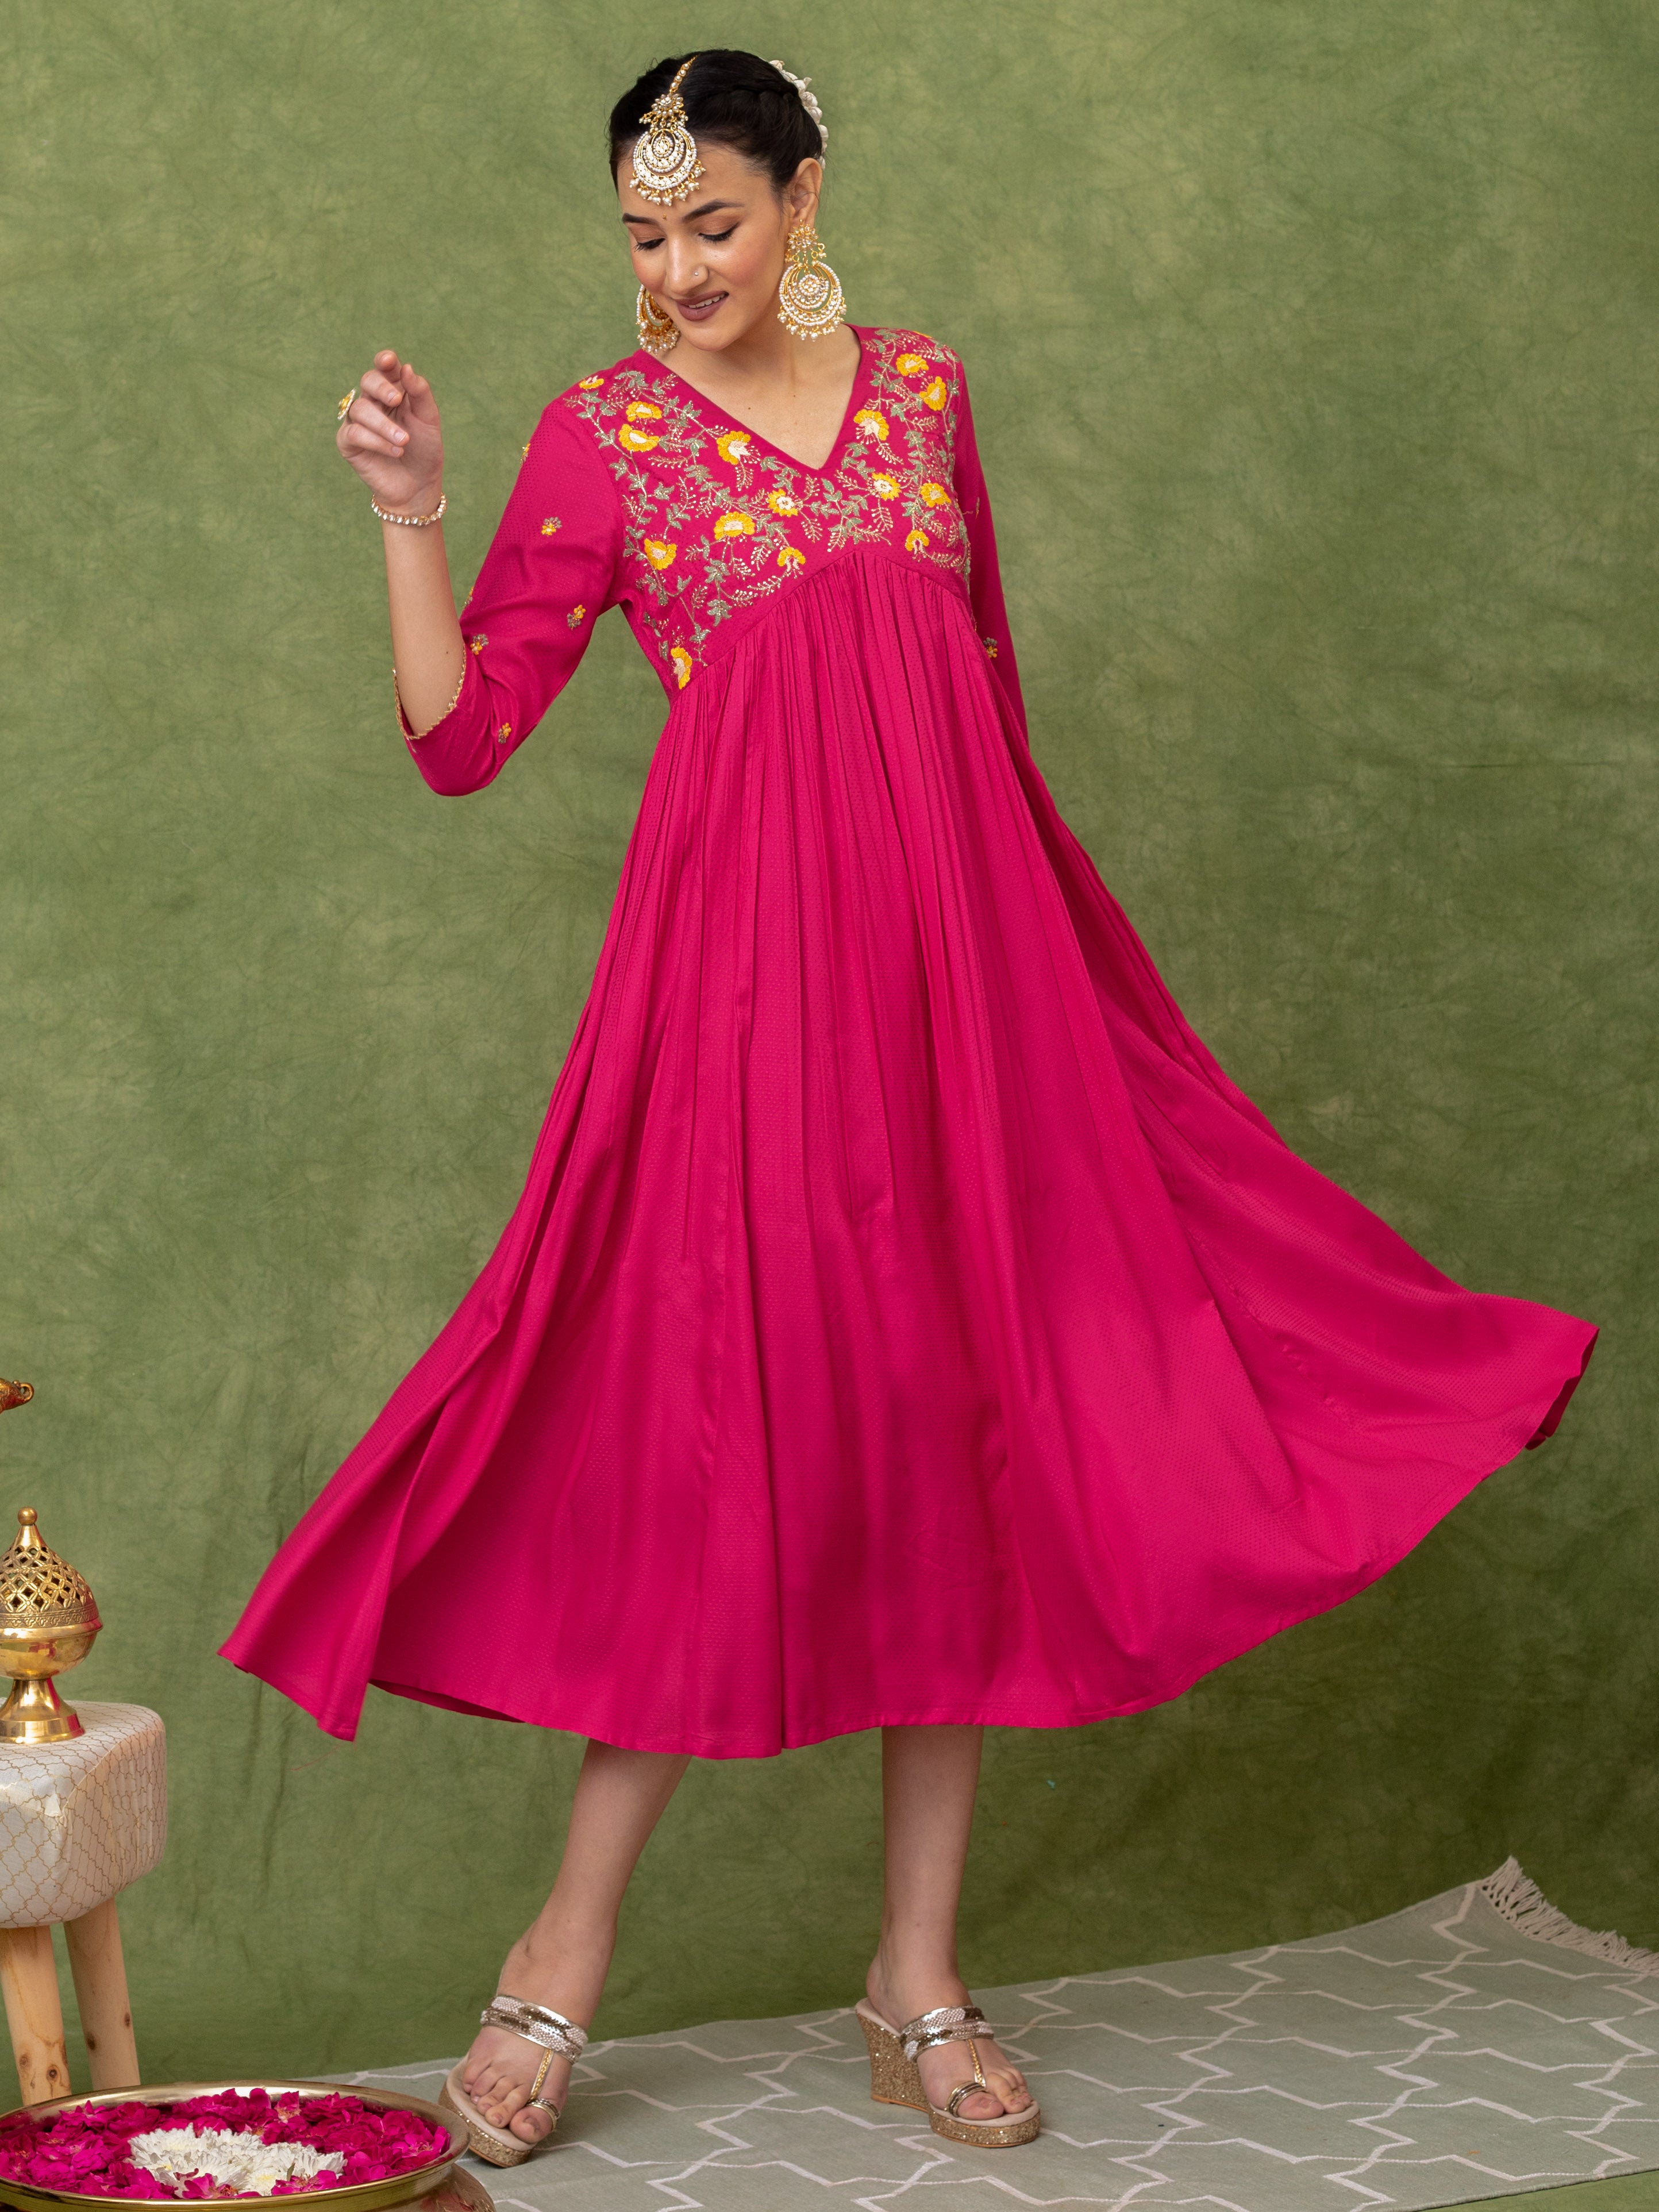 this-floral-embroidered-v-neck-pink-a-line-dress-is-a-stunning-addition-to-your-wardrobe-this-dress-features-multicolor-embroidery-creating-a-unique-look-that-will-stand-out-in-any-setting